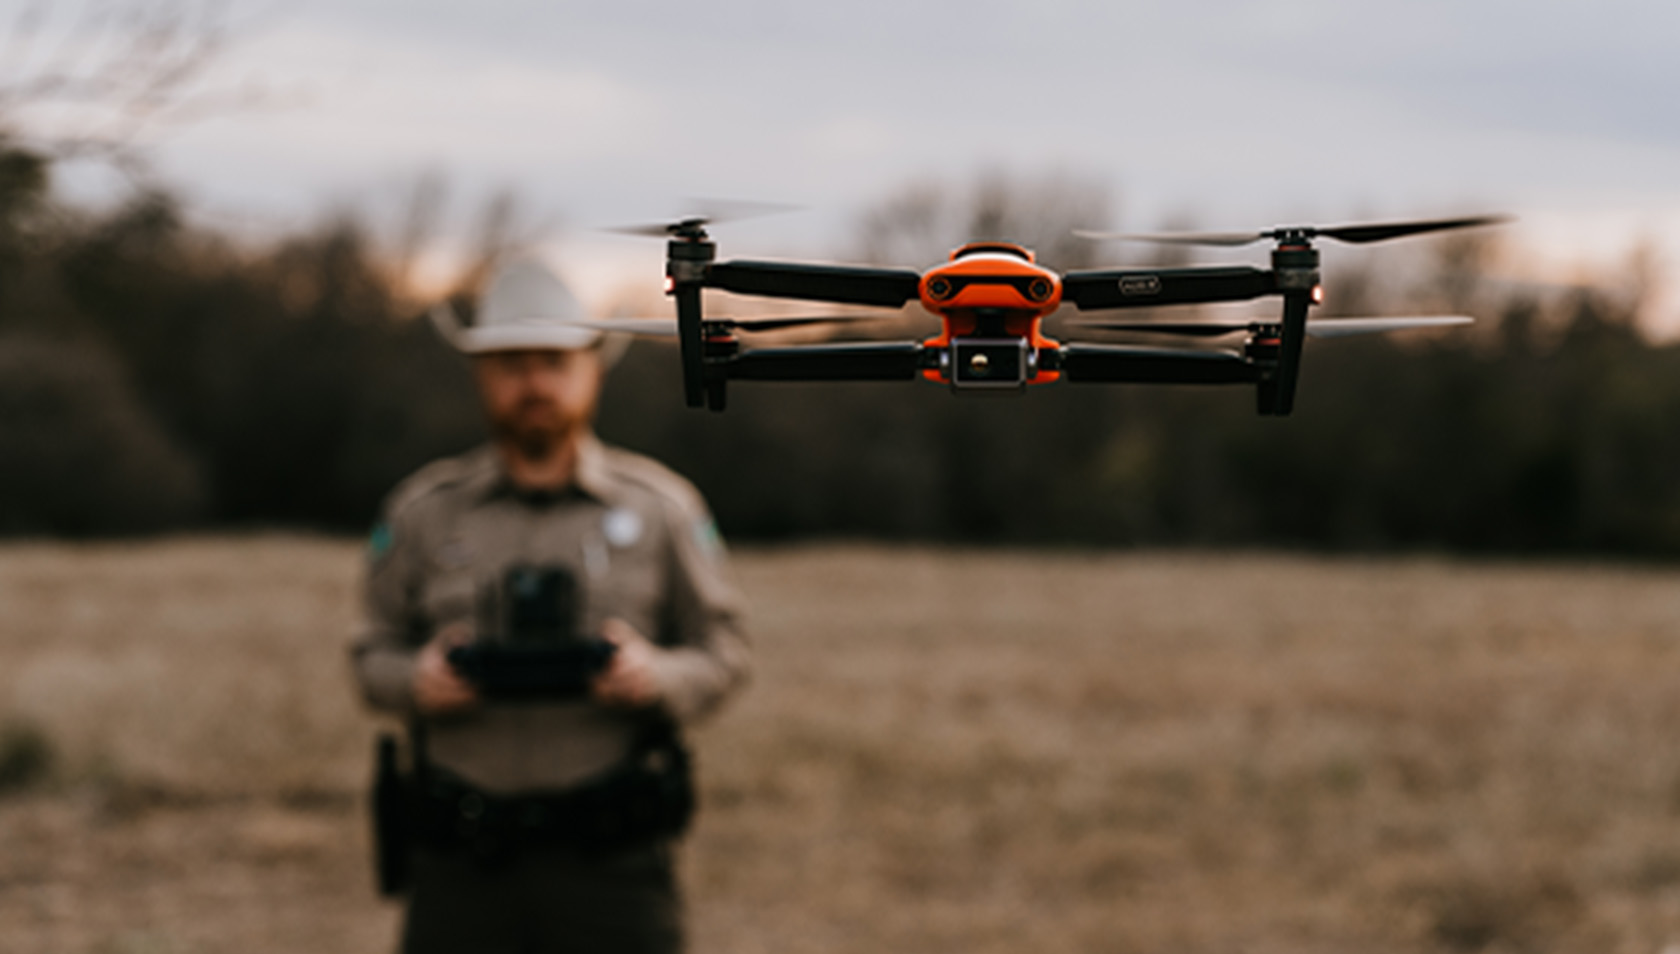 Story #1: Game Warden Michael Hummert with Drone